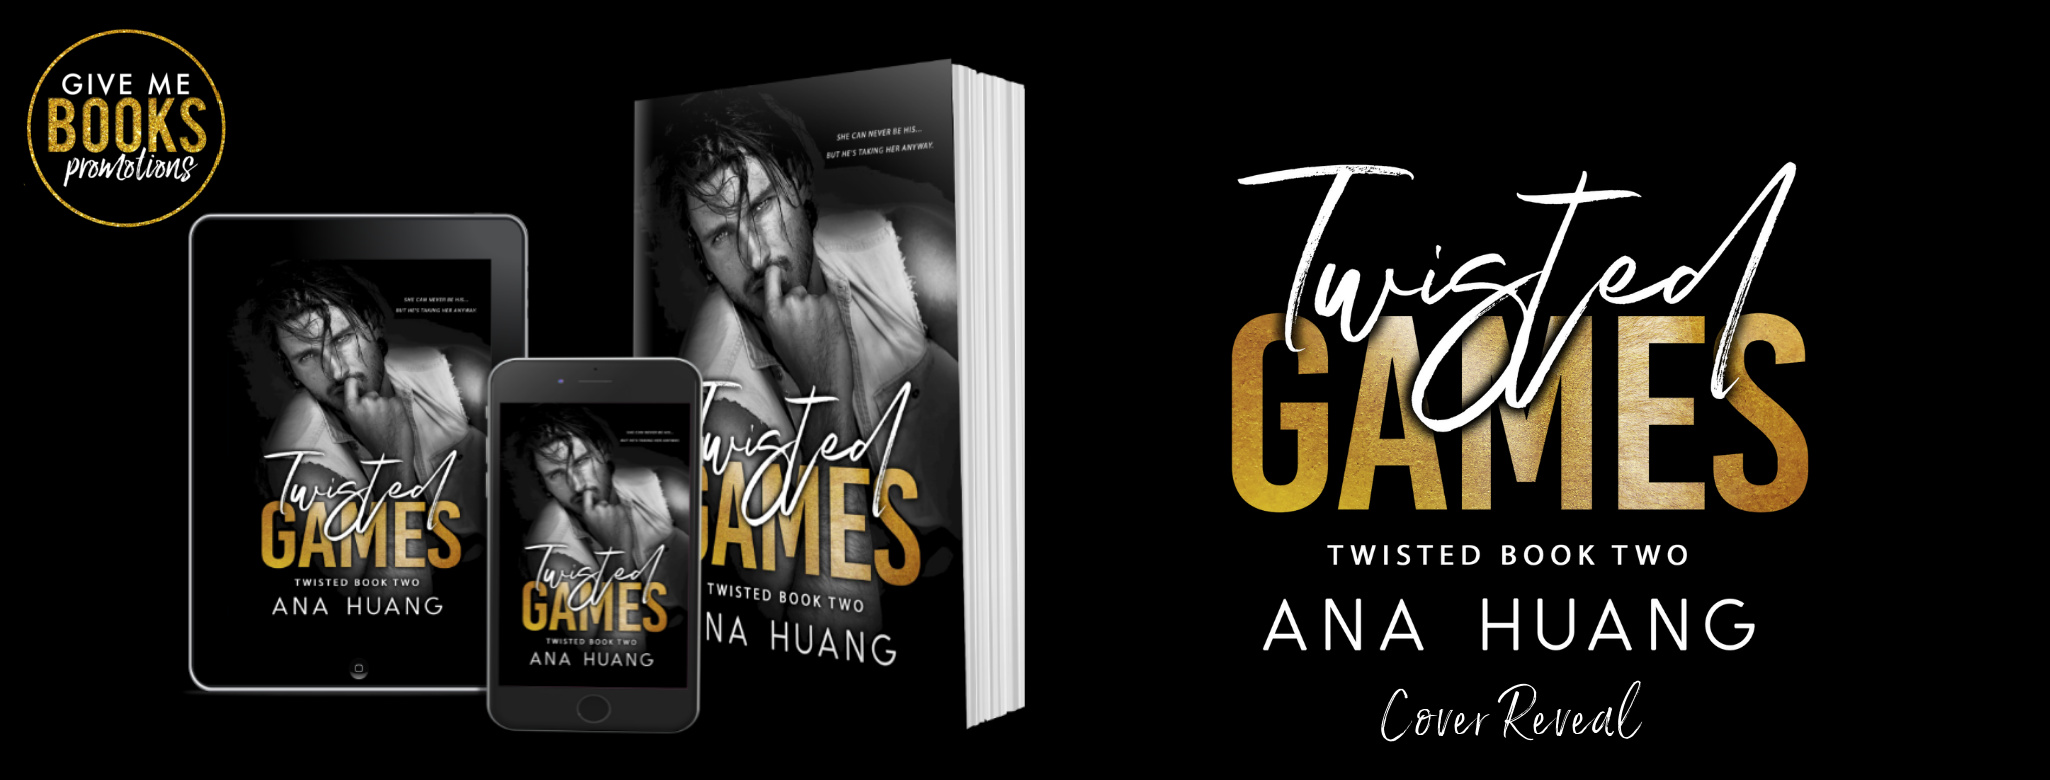 COVER REVEAL: TWISTED GAMES by Ana Huang – Read 'n' Dazzled